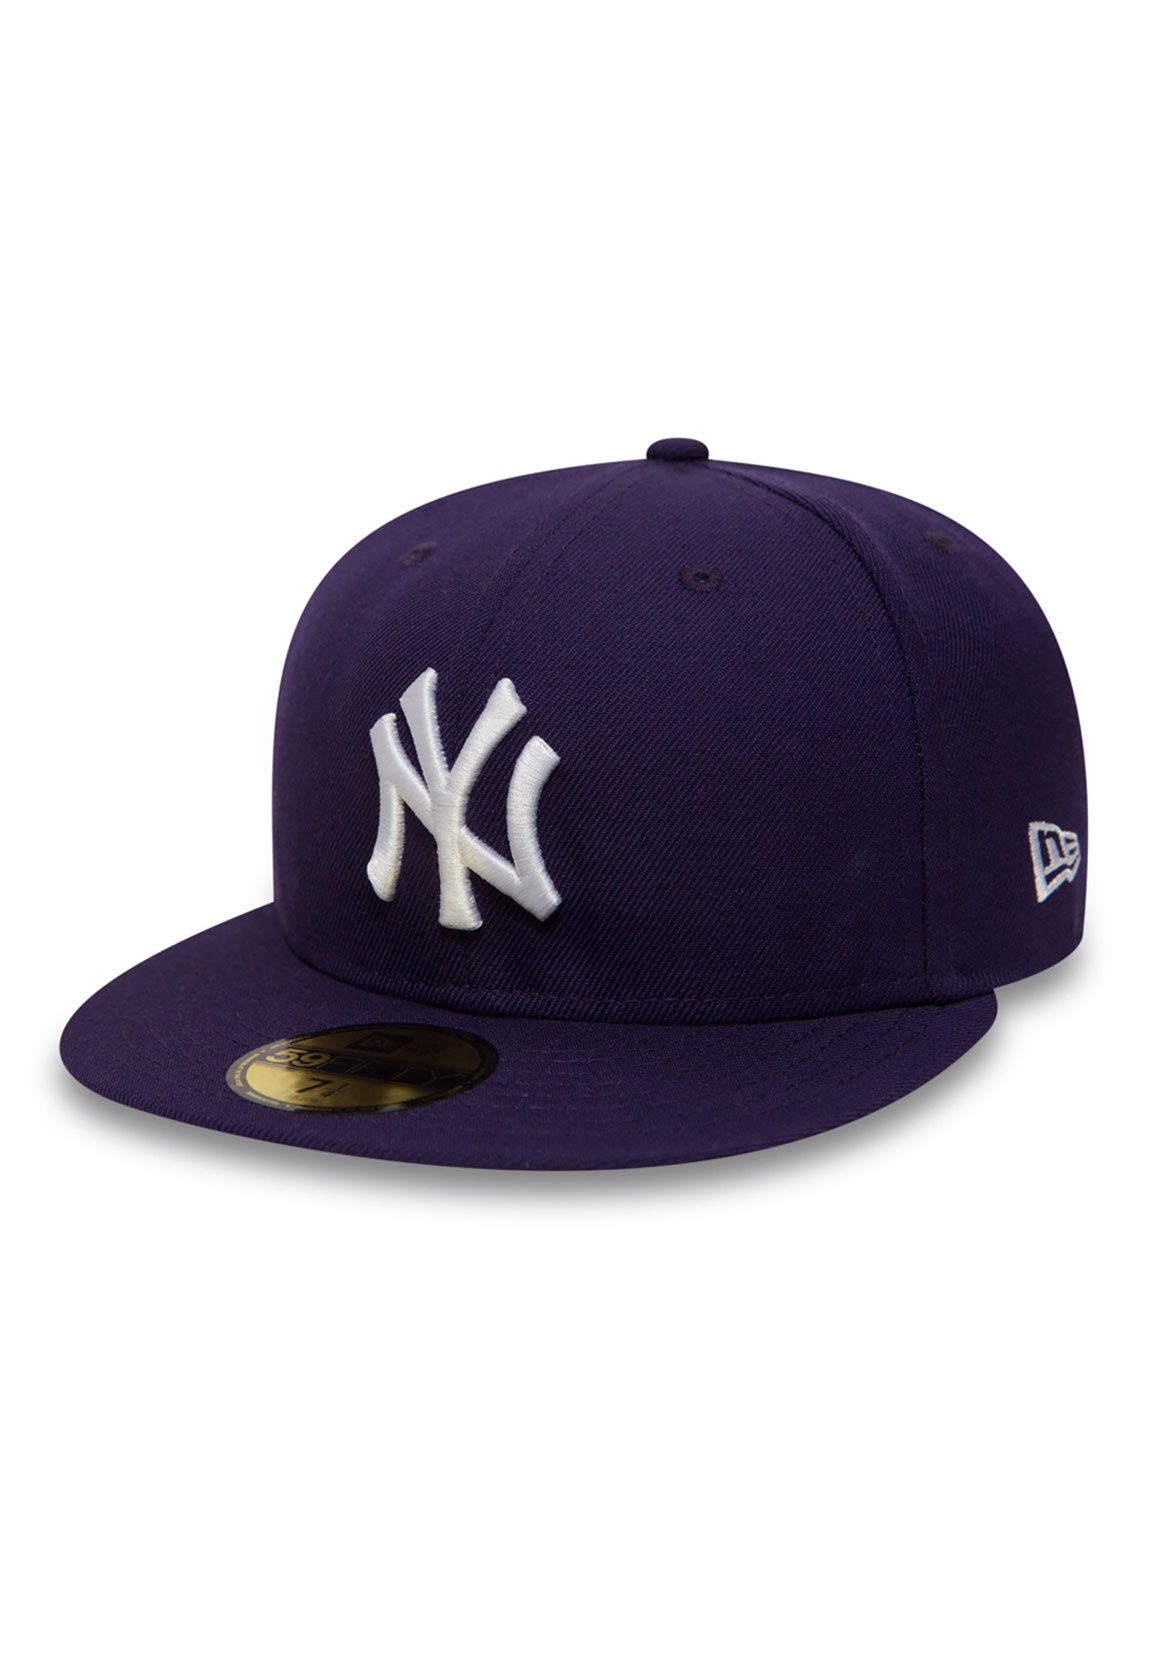 New Era Fitted Cap New Era 59Fifty Cap NY YANKEES Purple Lila | Fitted Caps